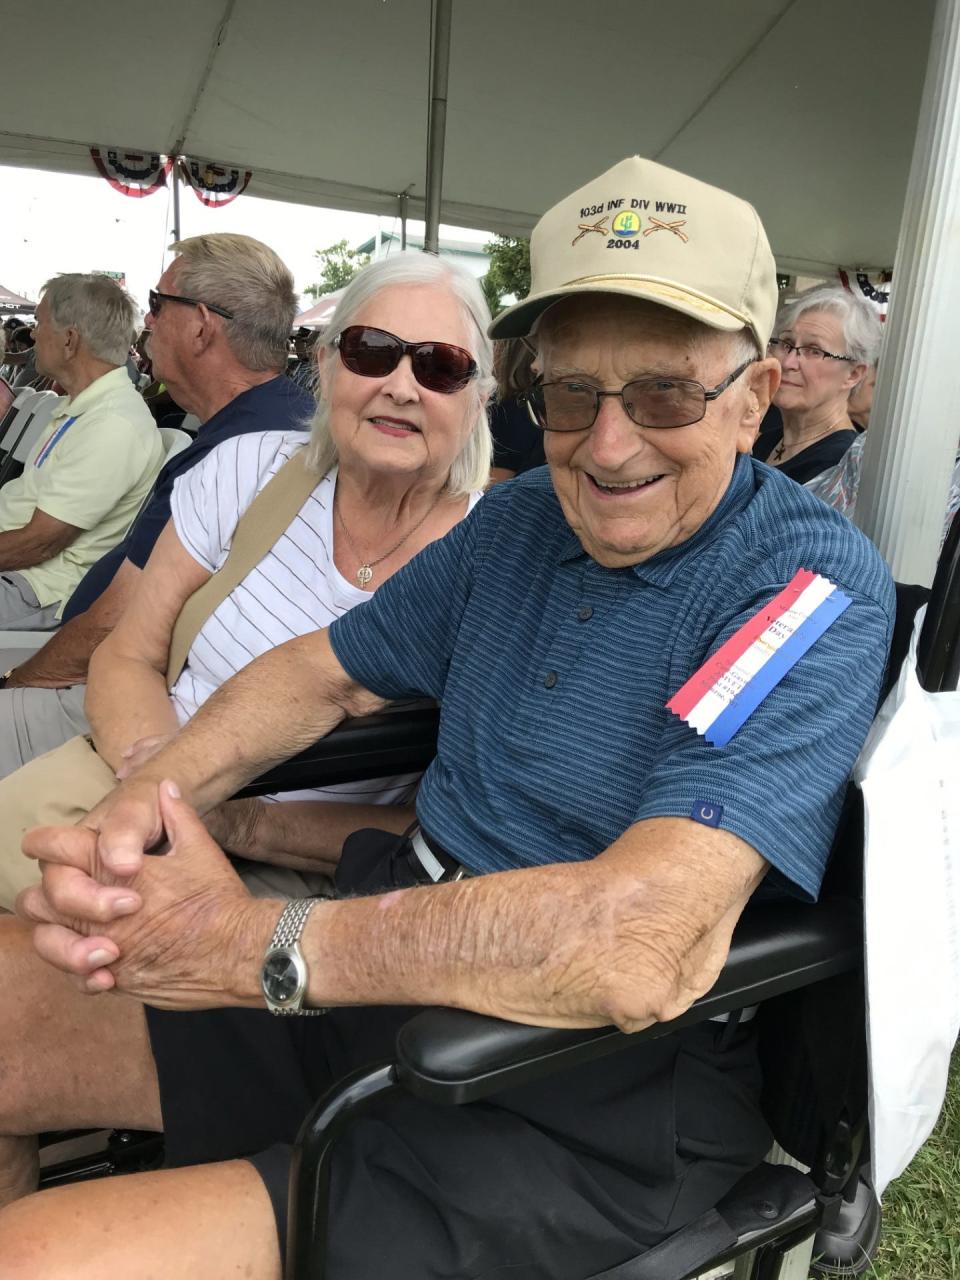 Eugene Poupard, 101, of Monroe was honored as the oldest veteran present at Monday's Veterans Day program at the Monroe County Fair. Poupard is shown with his daughter, Mickey Smith.